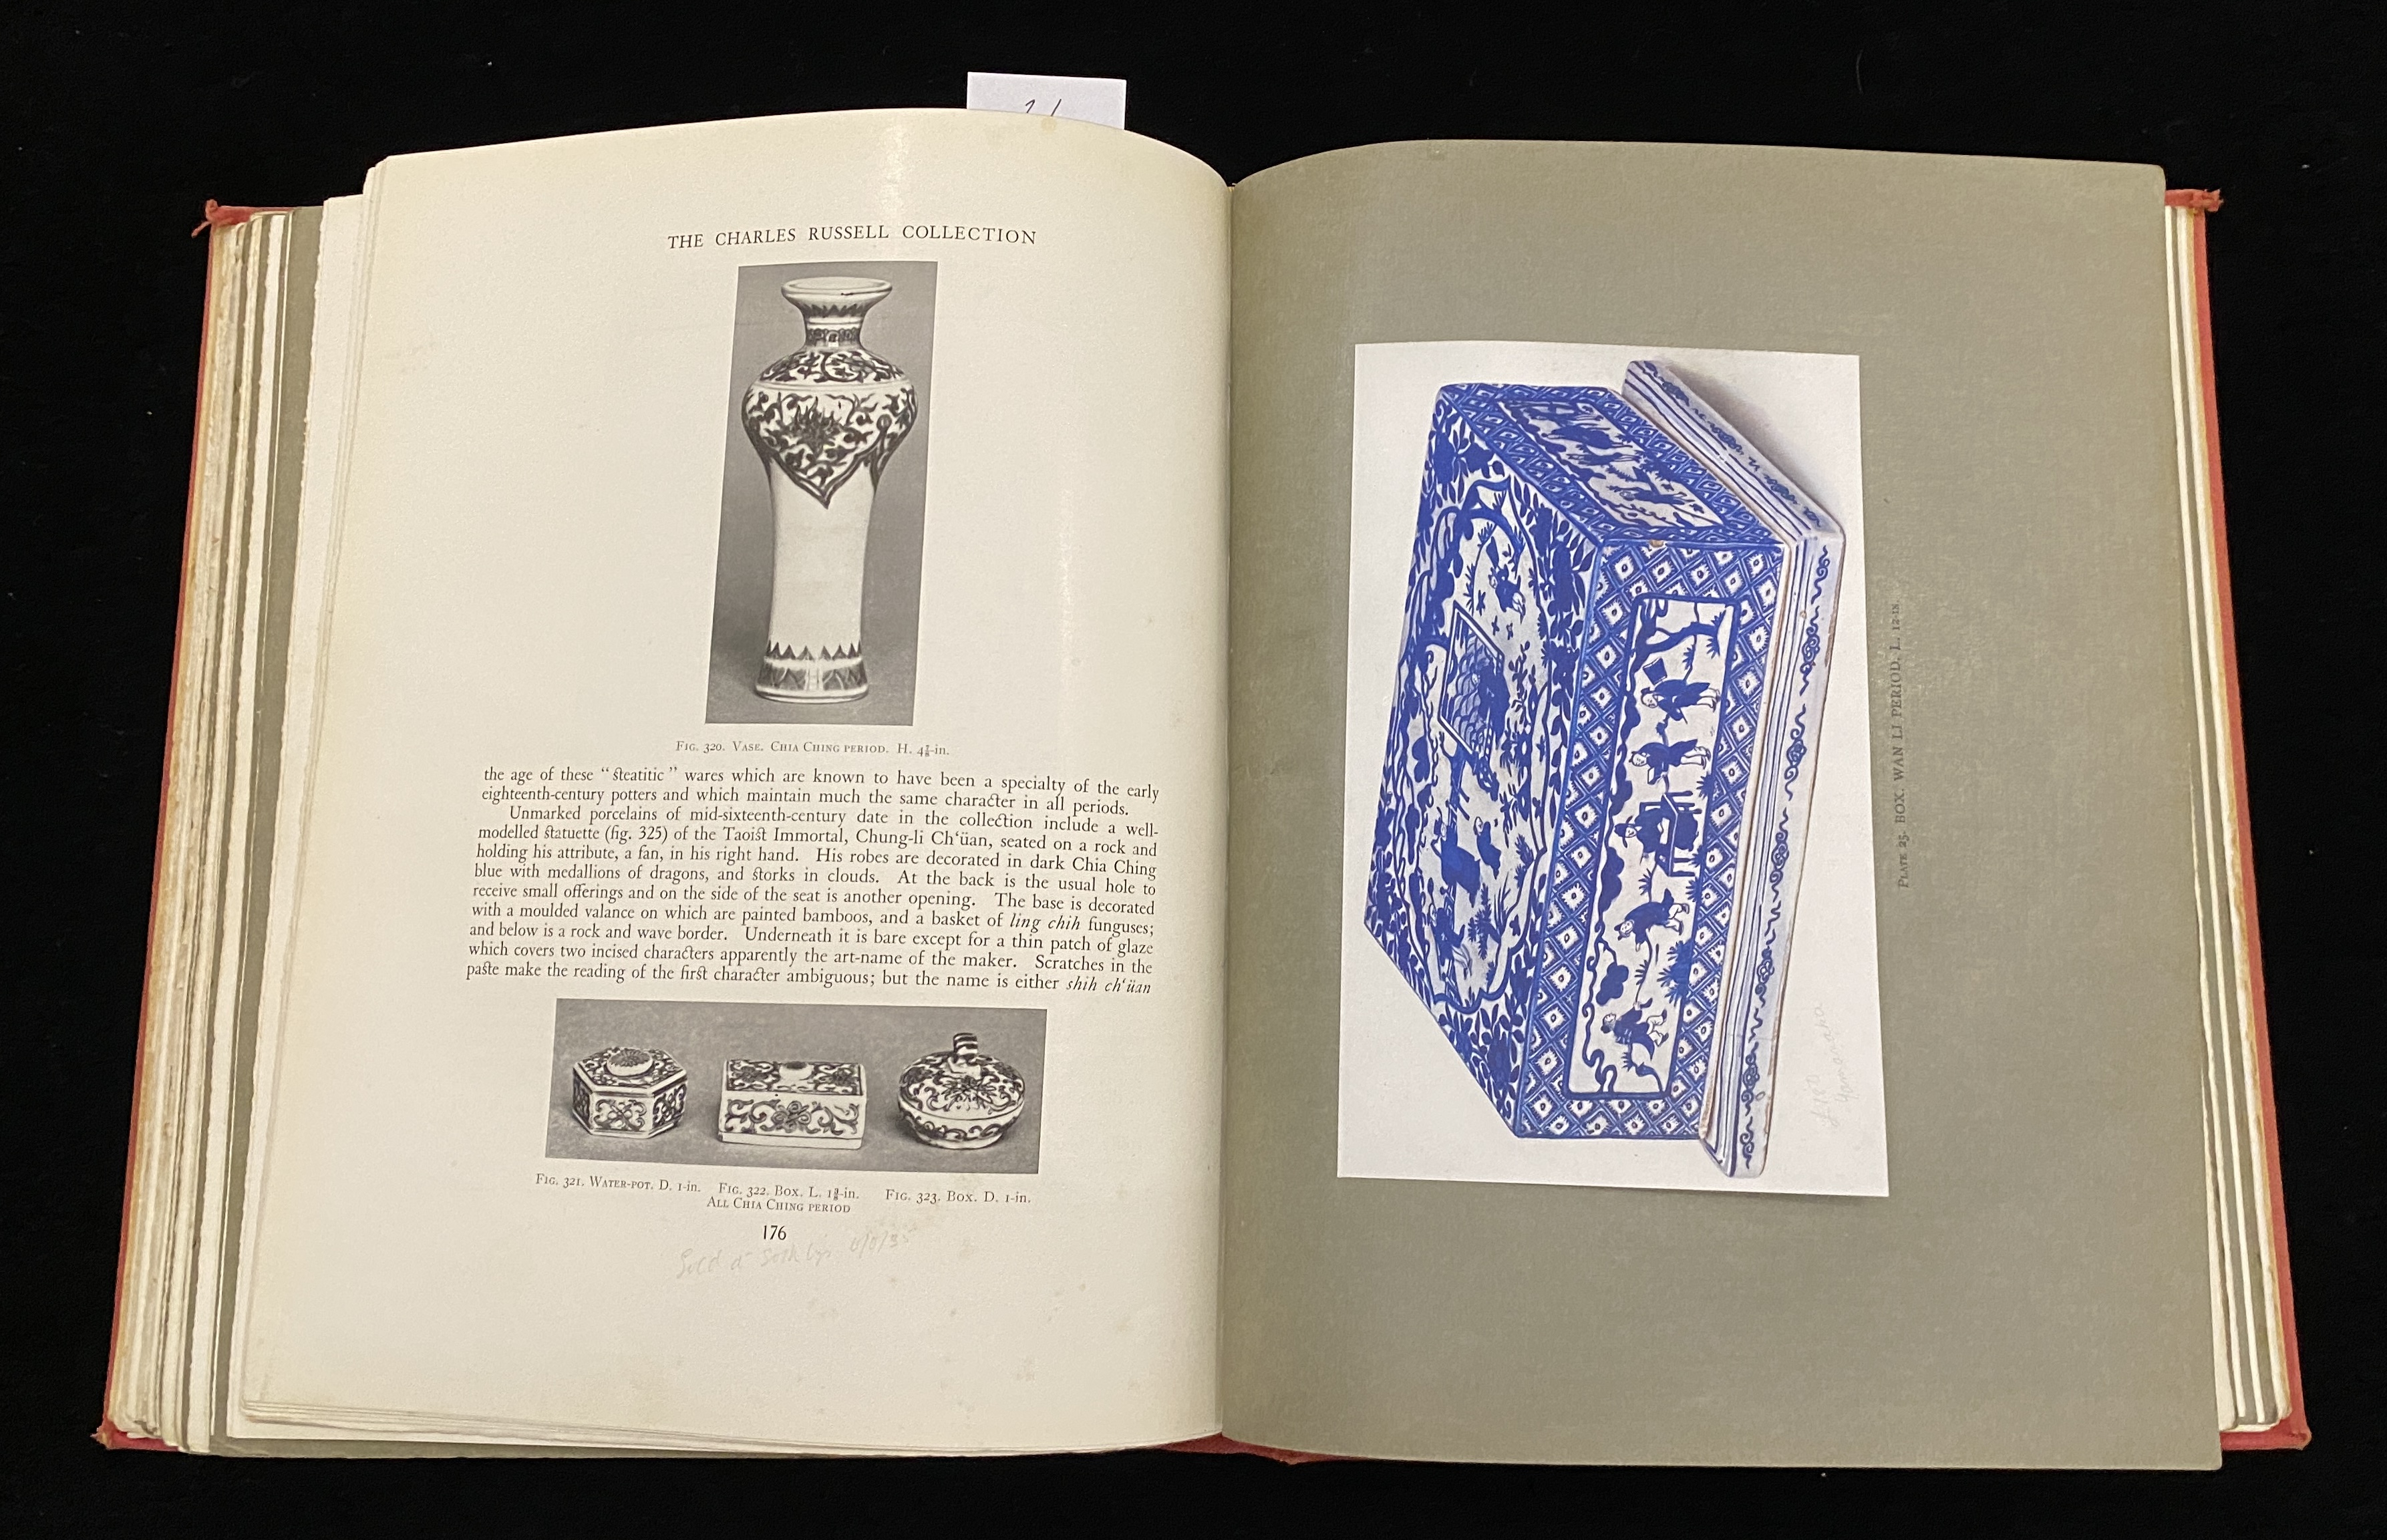 CHINESE CERAMICS IN PRIVATE COLLECTIONS R. L. HOBSON B. RACKHAM W. KING HALT0N & TRUSCOTT SMITH 1931 - Image 8 of 10